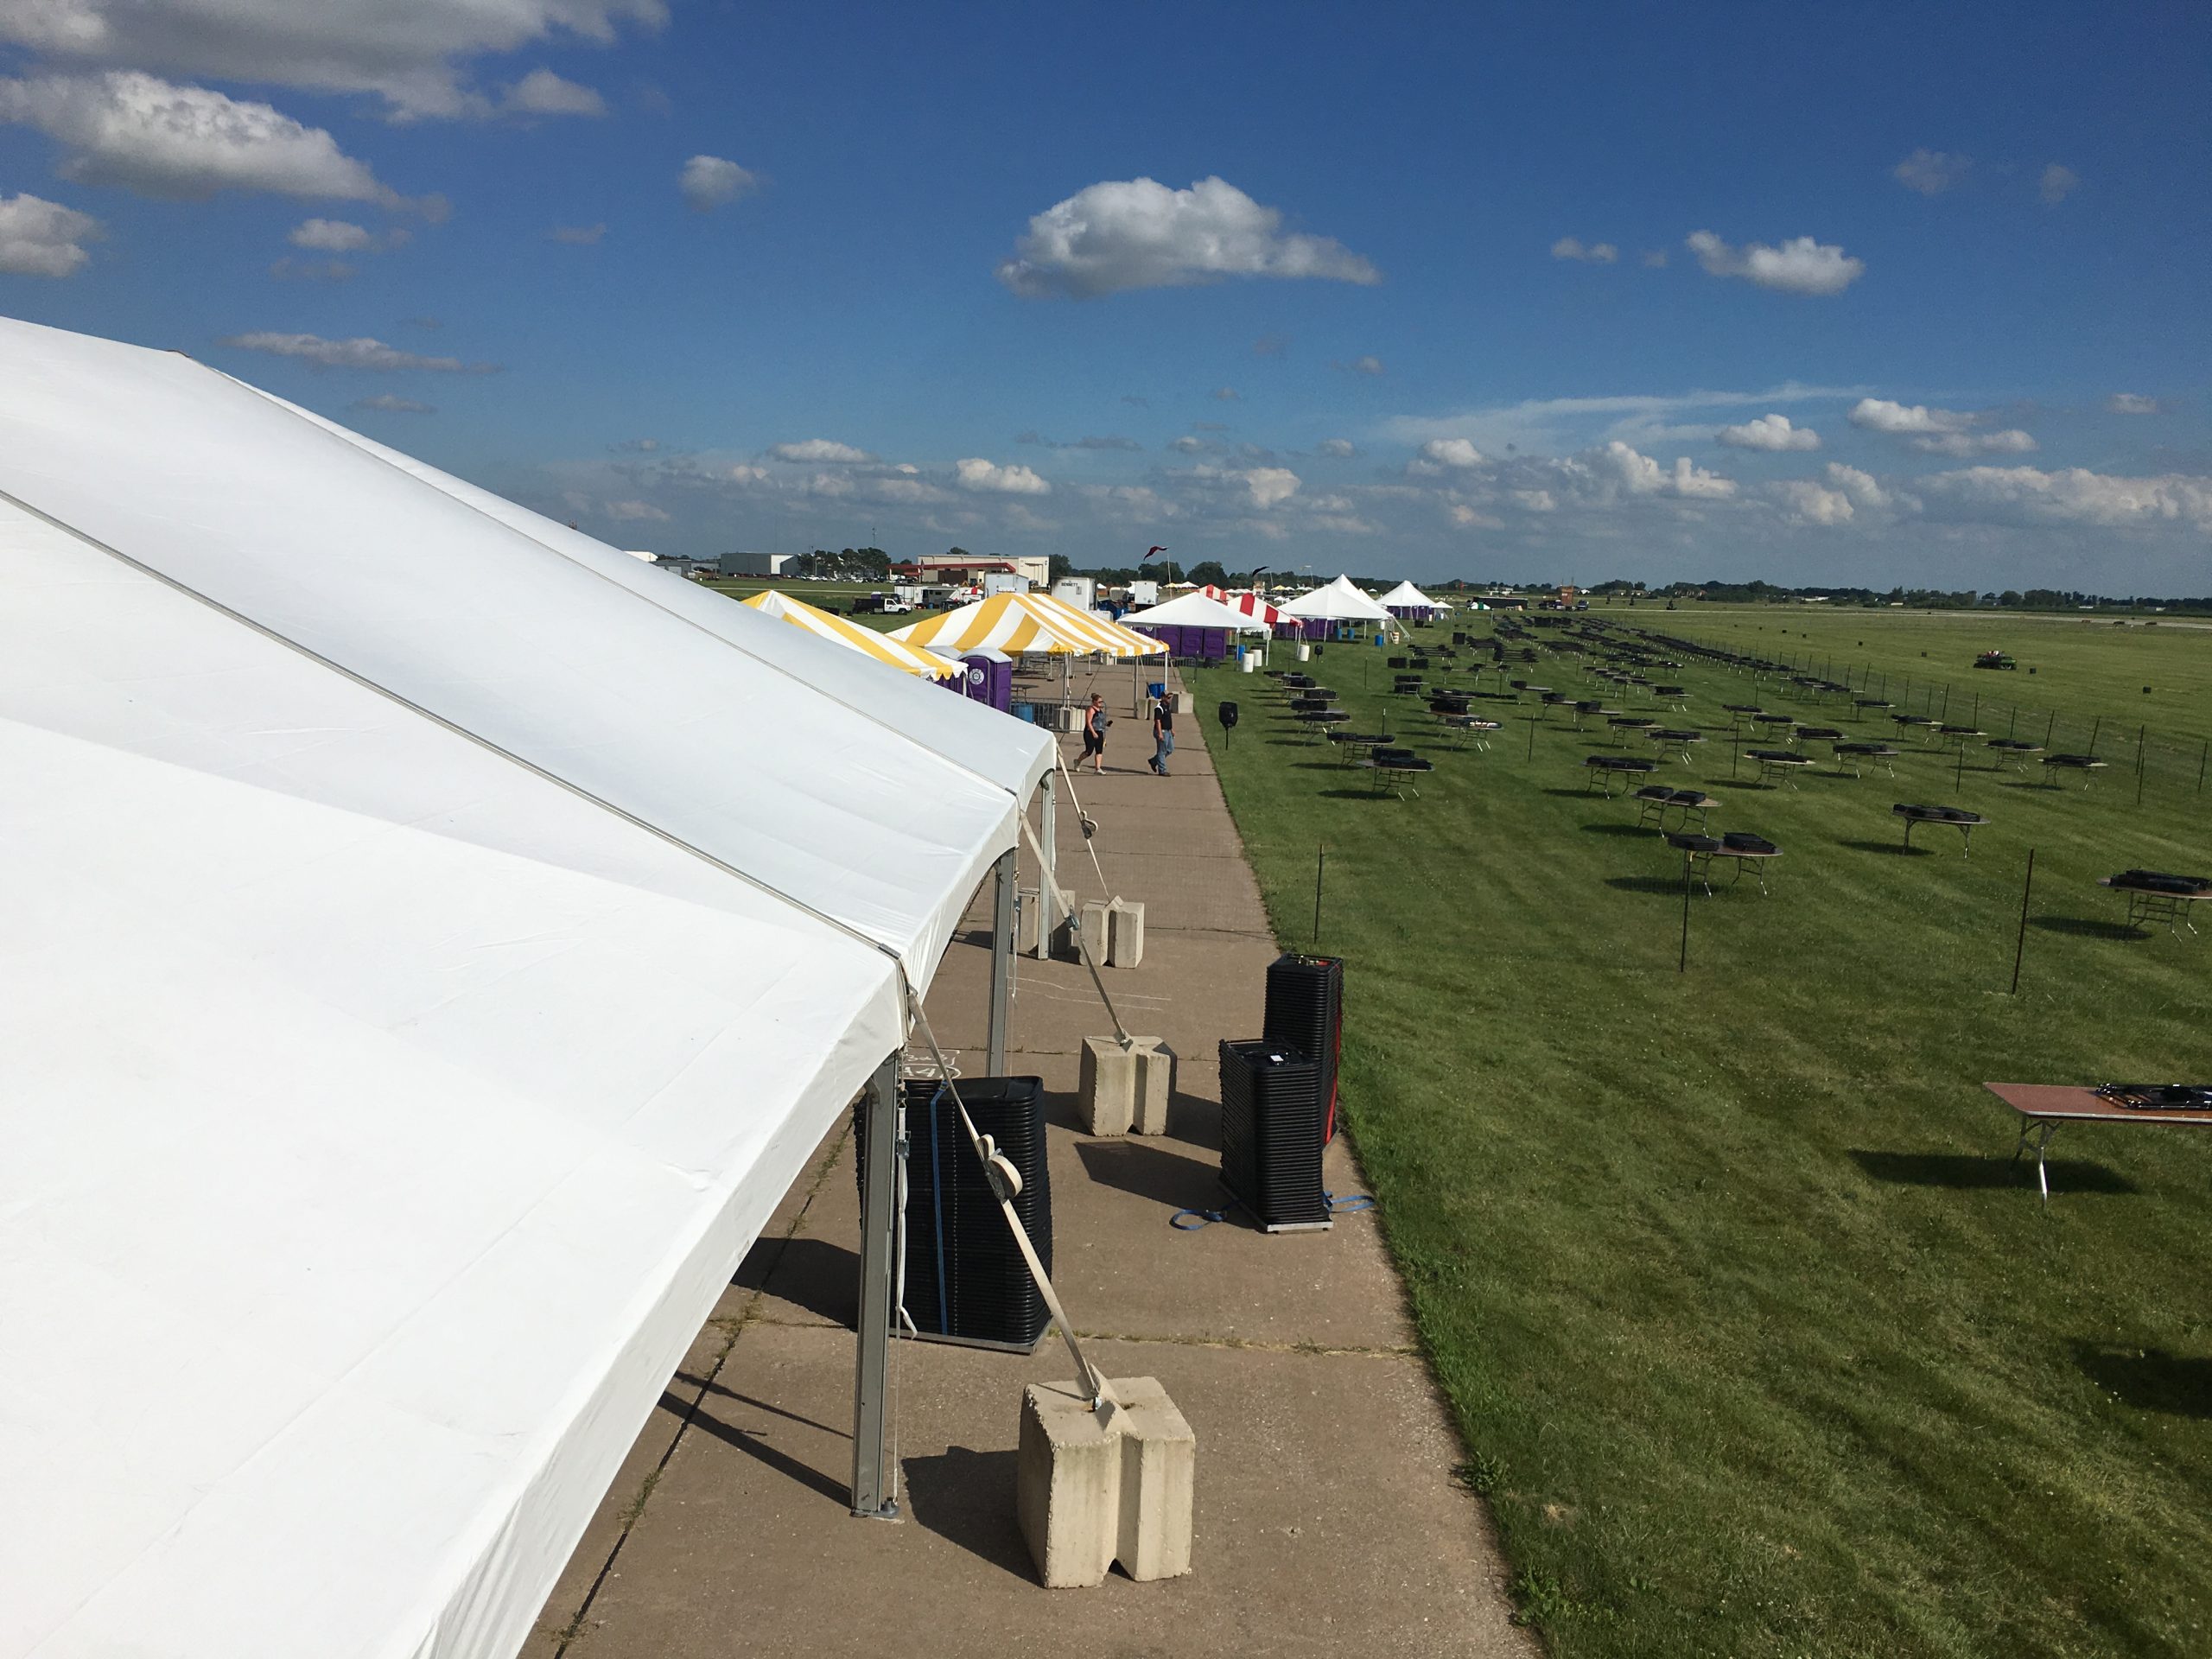 40' x 60' Hybrid tent and other tents at the 2016 Quad Cities Air Show